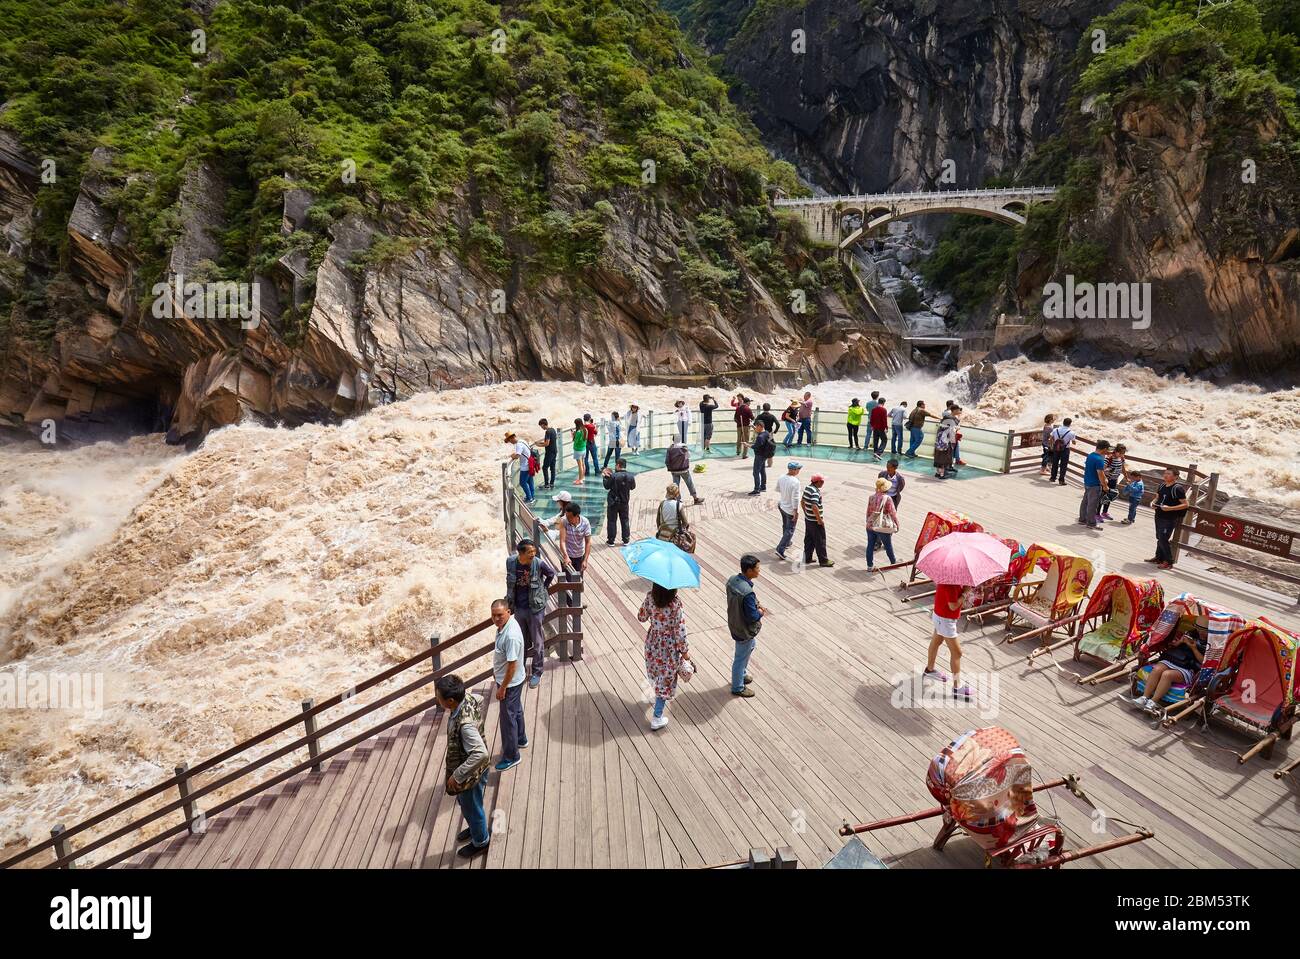 Jizha, China - September 24, 2017: People at the Tiger Leaping Gorge rough waters viewpoint. Stock Photo